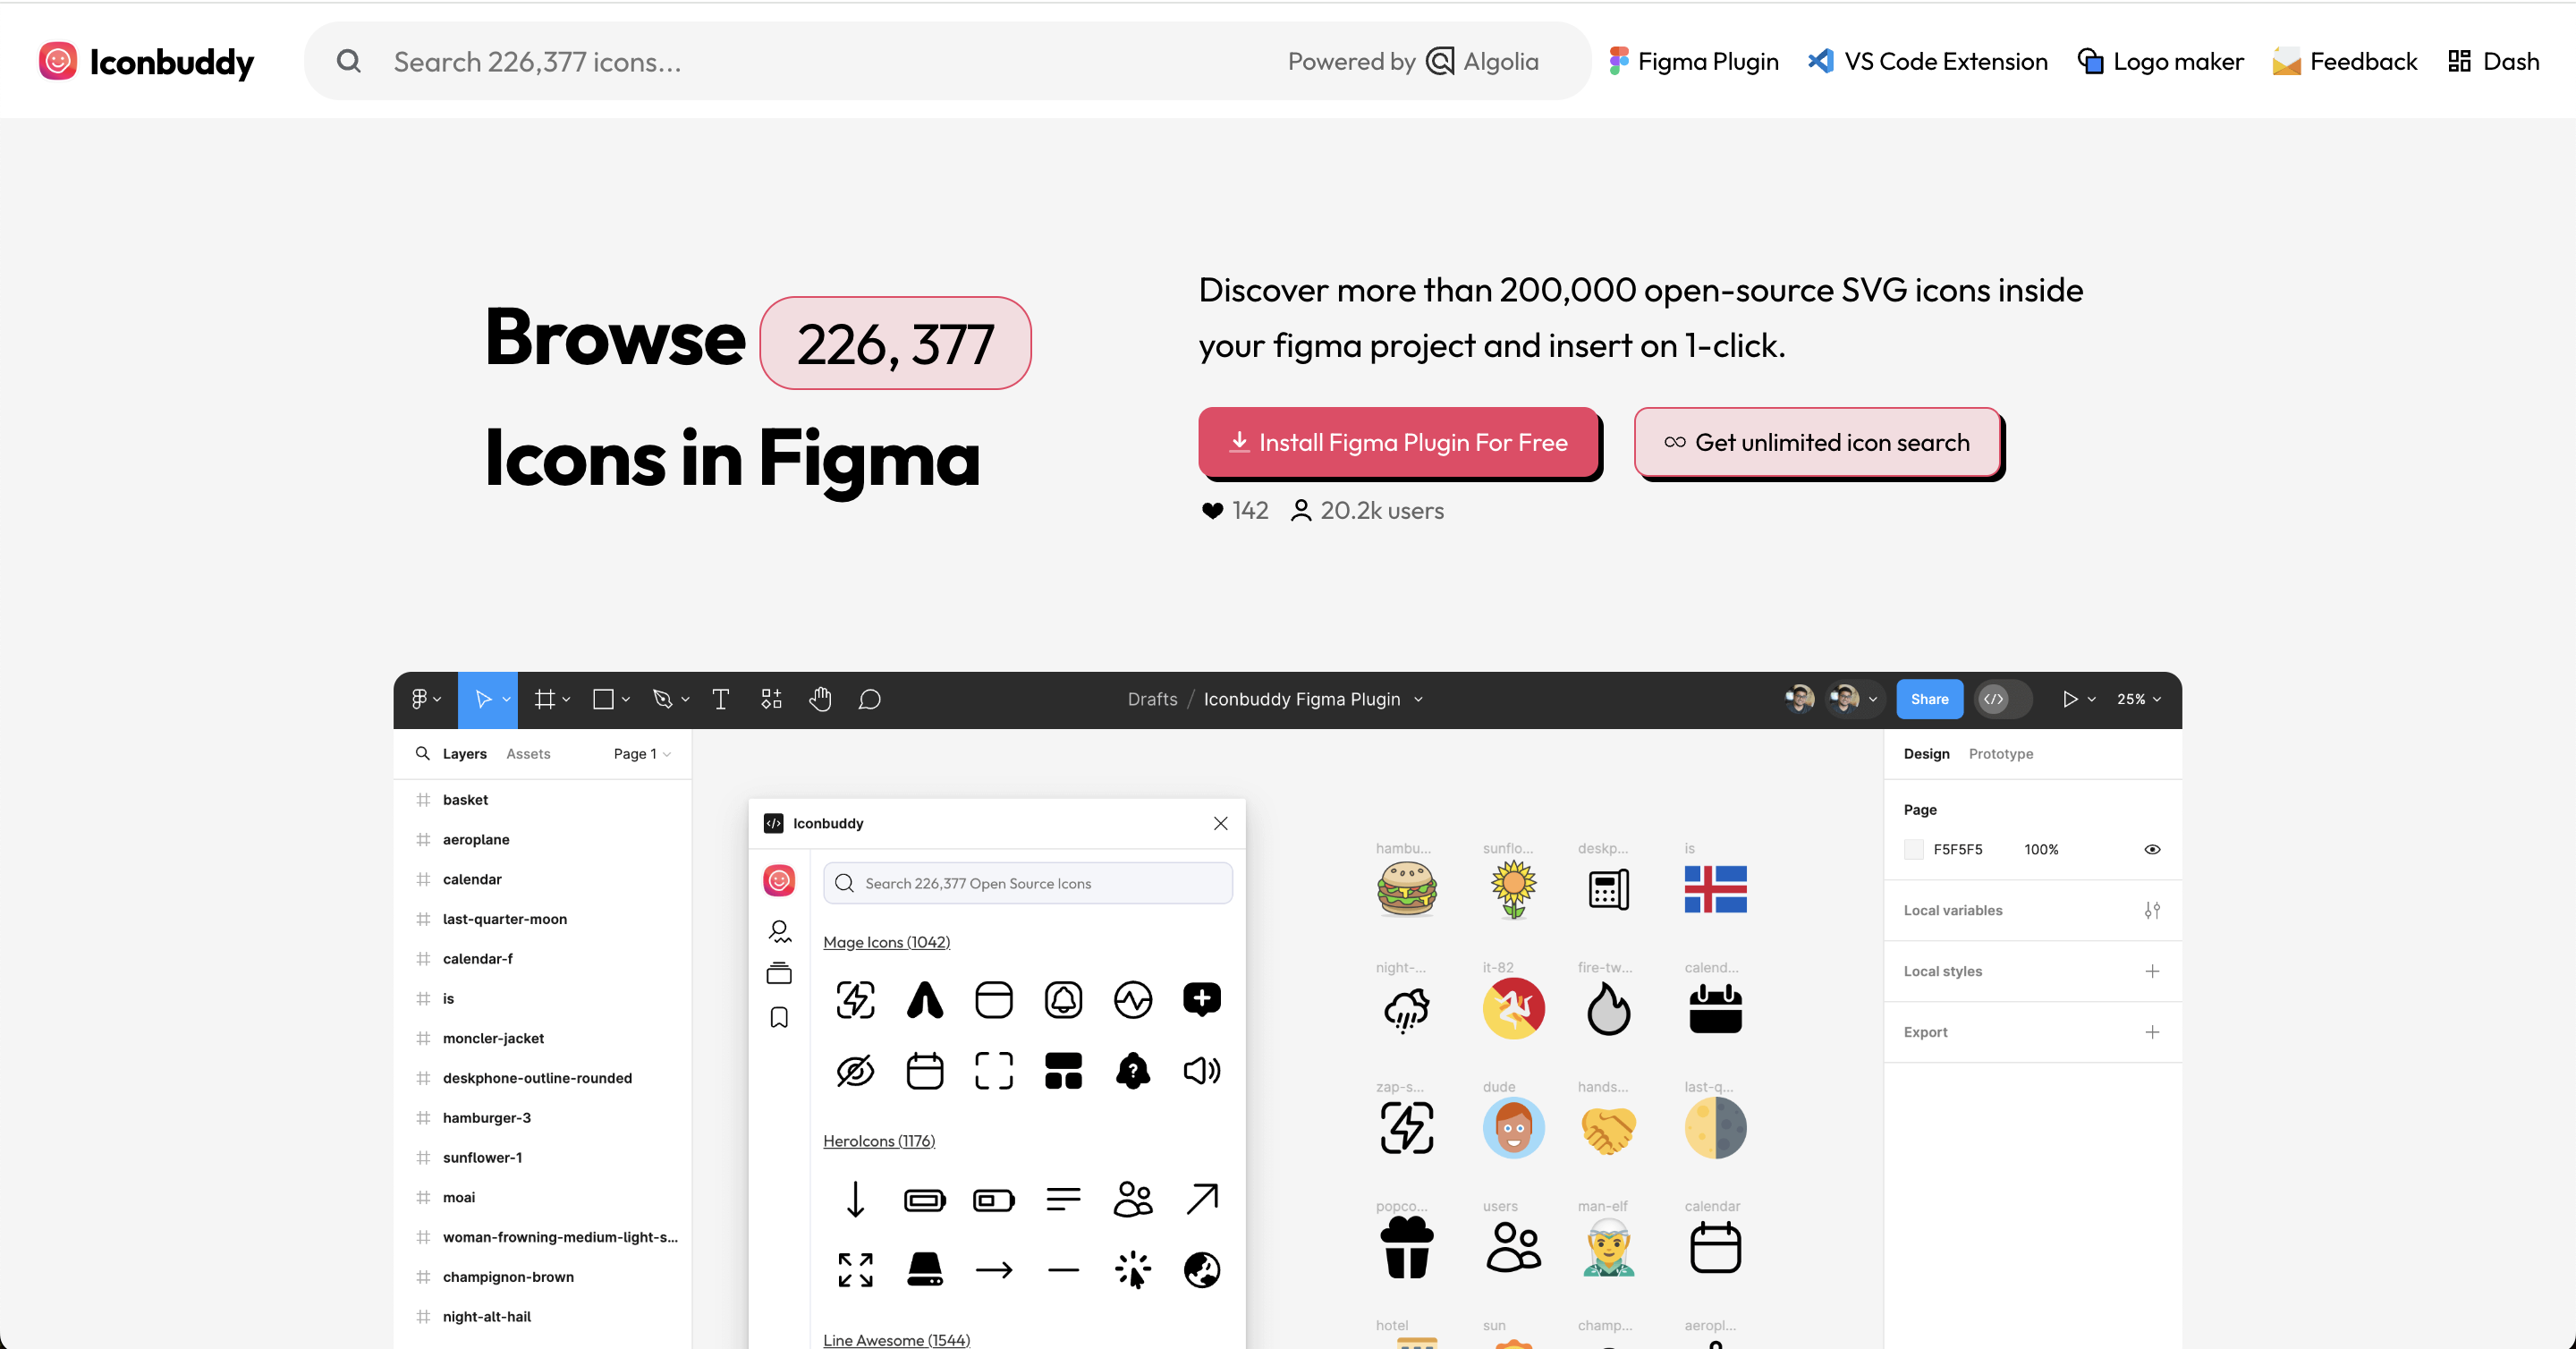 iconbuddy-figma-plugin - Browse 226,377 SVG icons in Figma